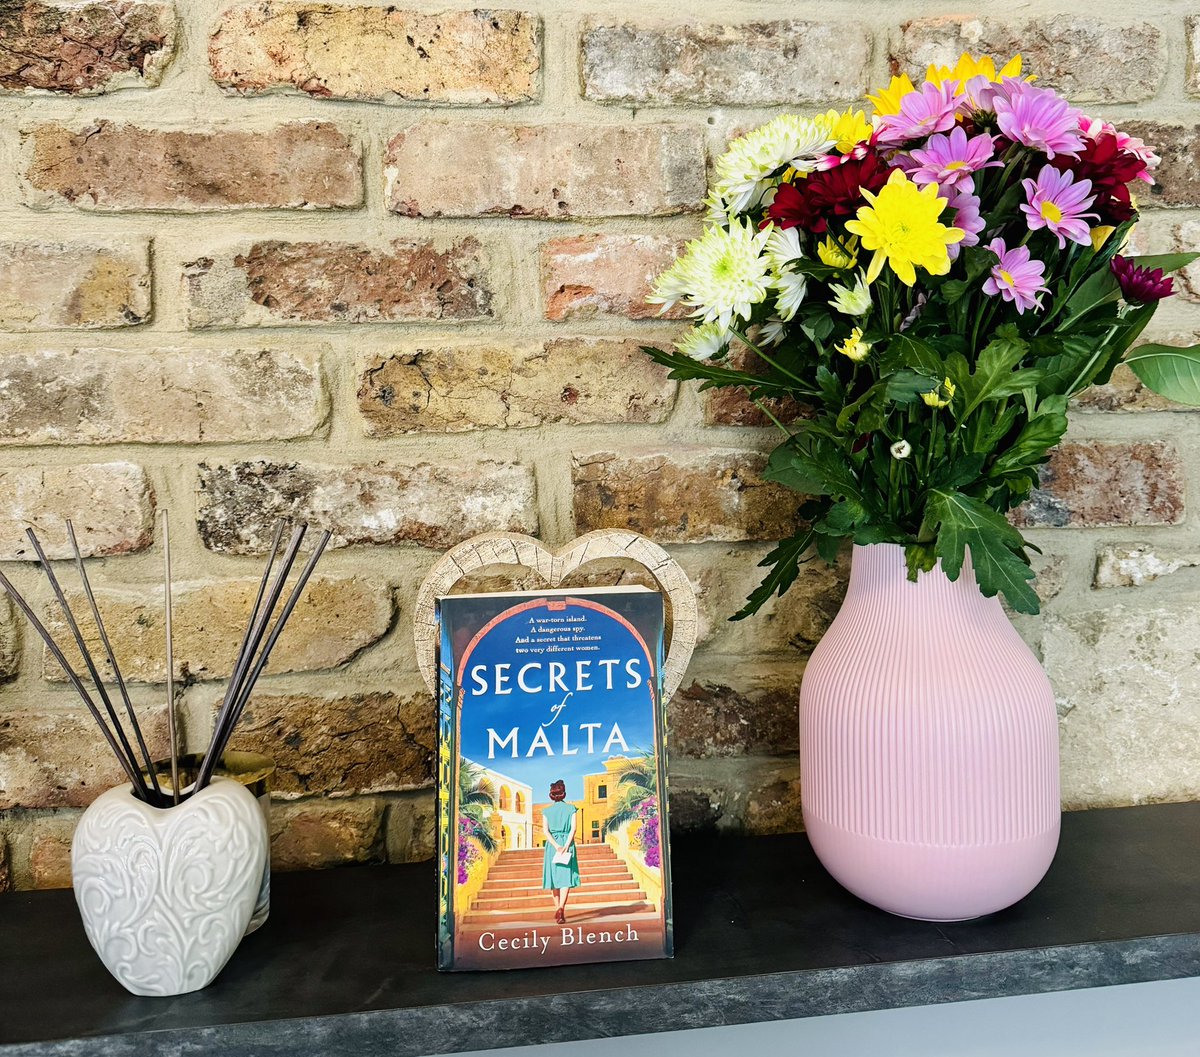 My next read has just arrived! So excited to read #SecretsofMalta, a historical fiction novel set in Malta, especially as I am half Maltese🇲🇹❤️